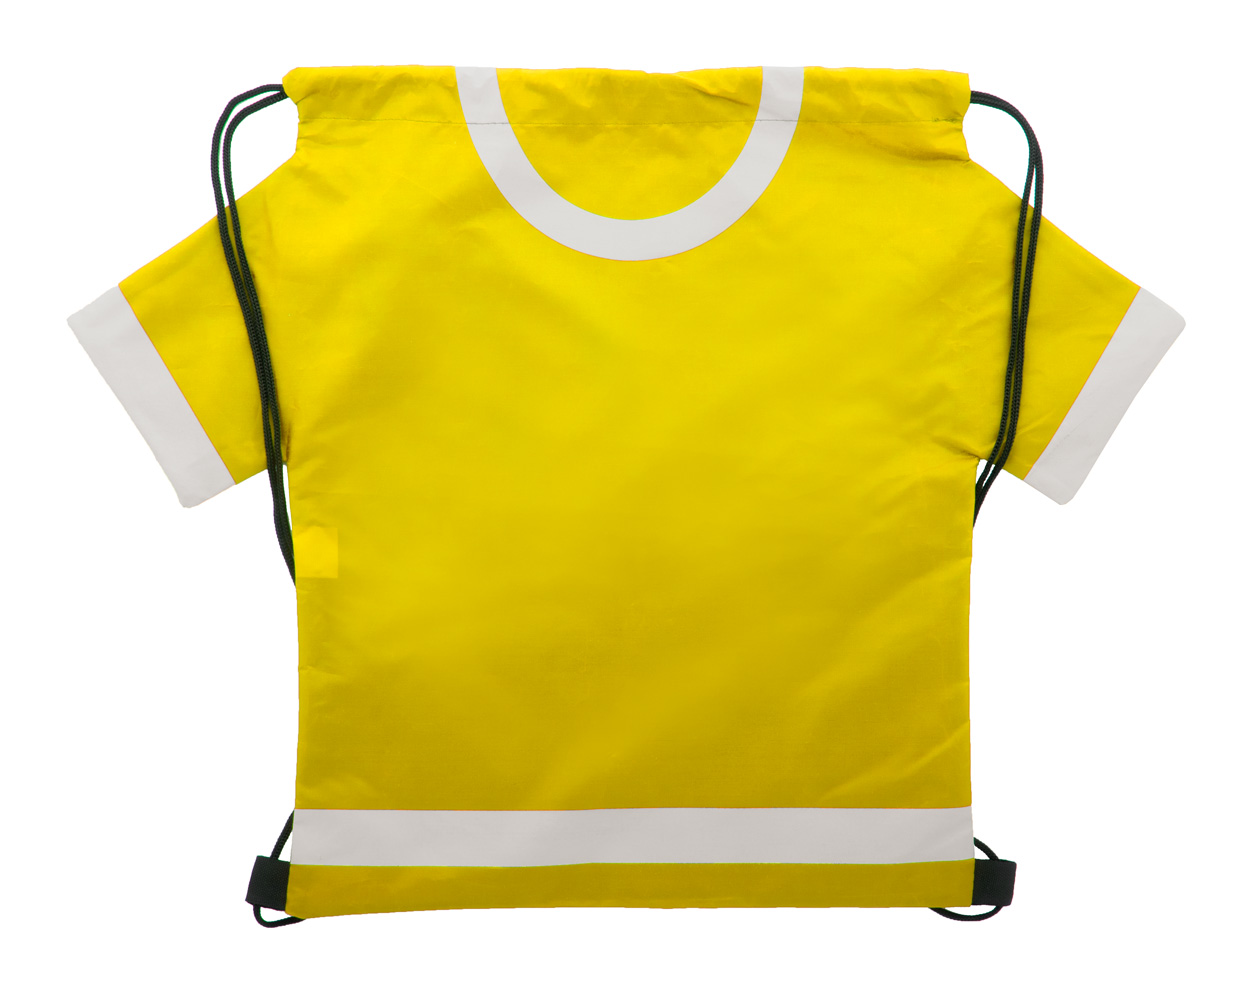 Polyester PAXER drawstring backpack in the shape of a T-shirt